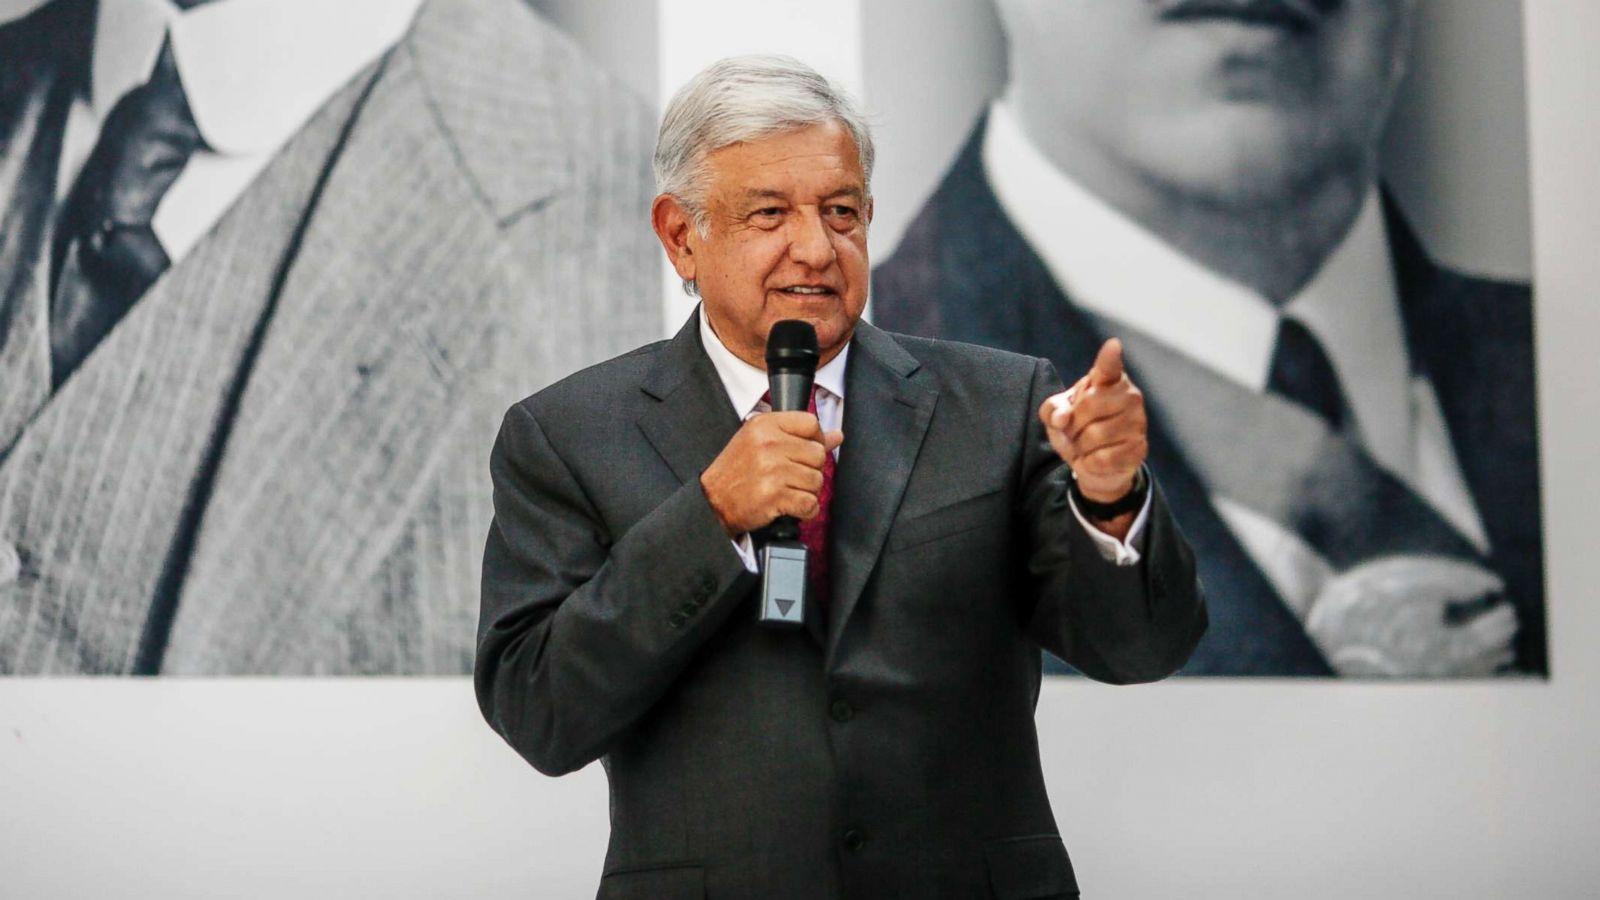 There is another Mexico now': Country's new president reflects